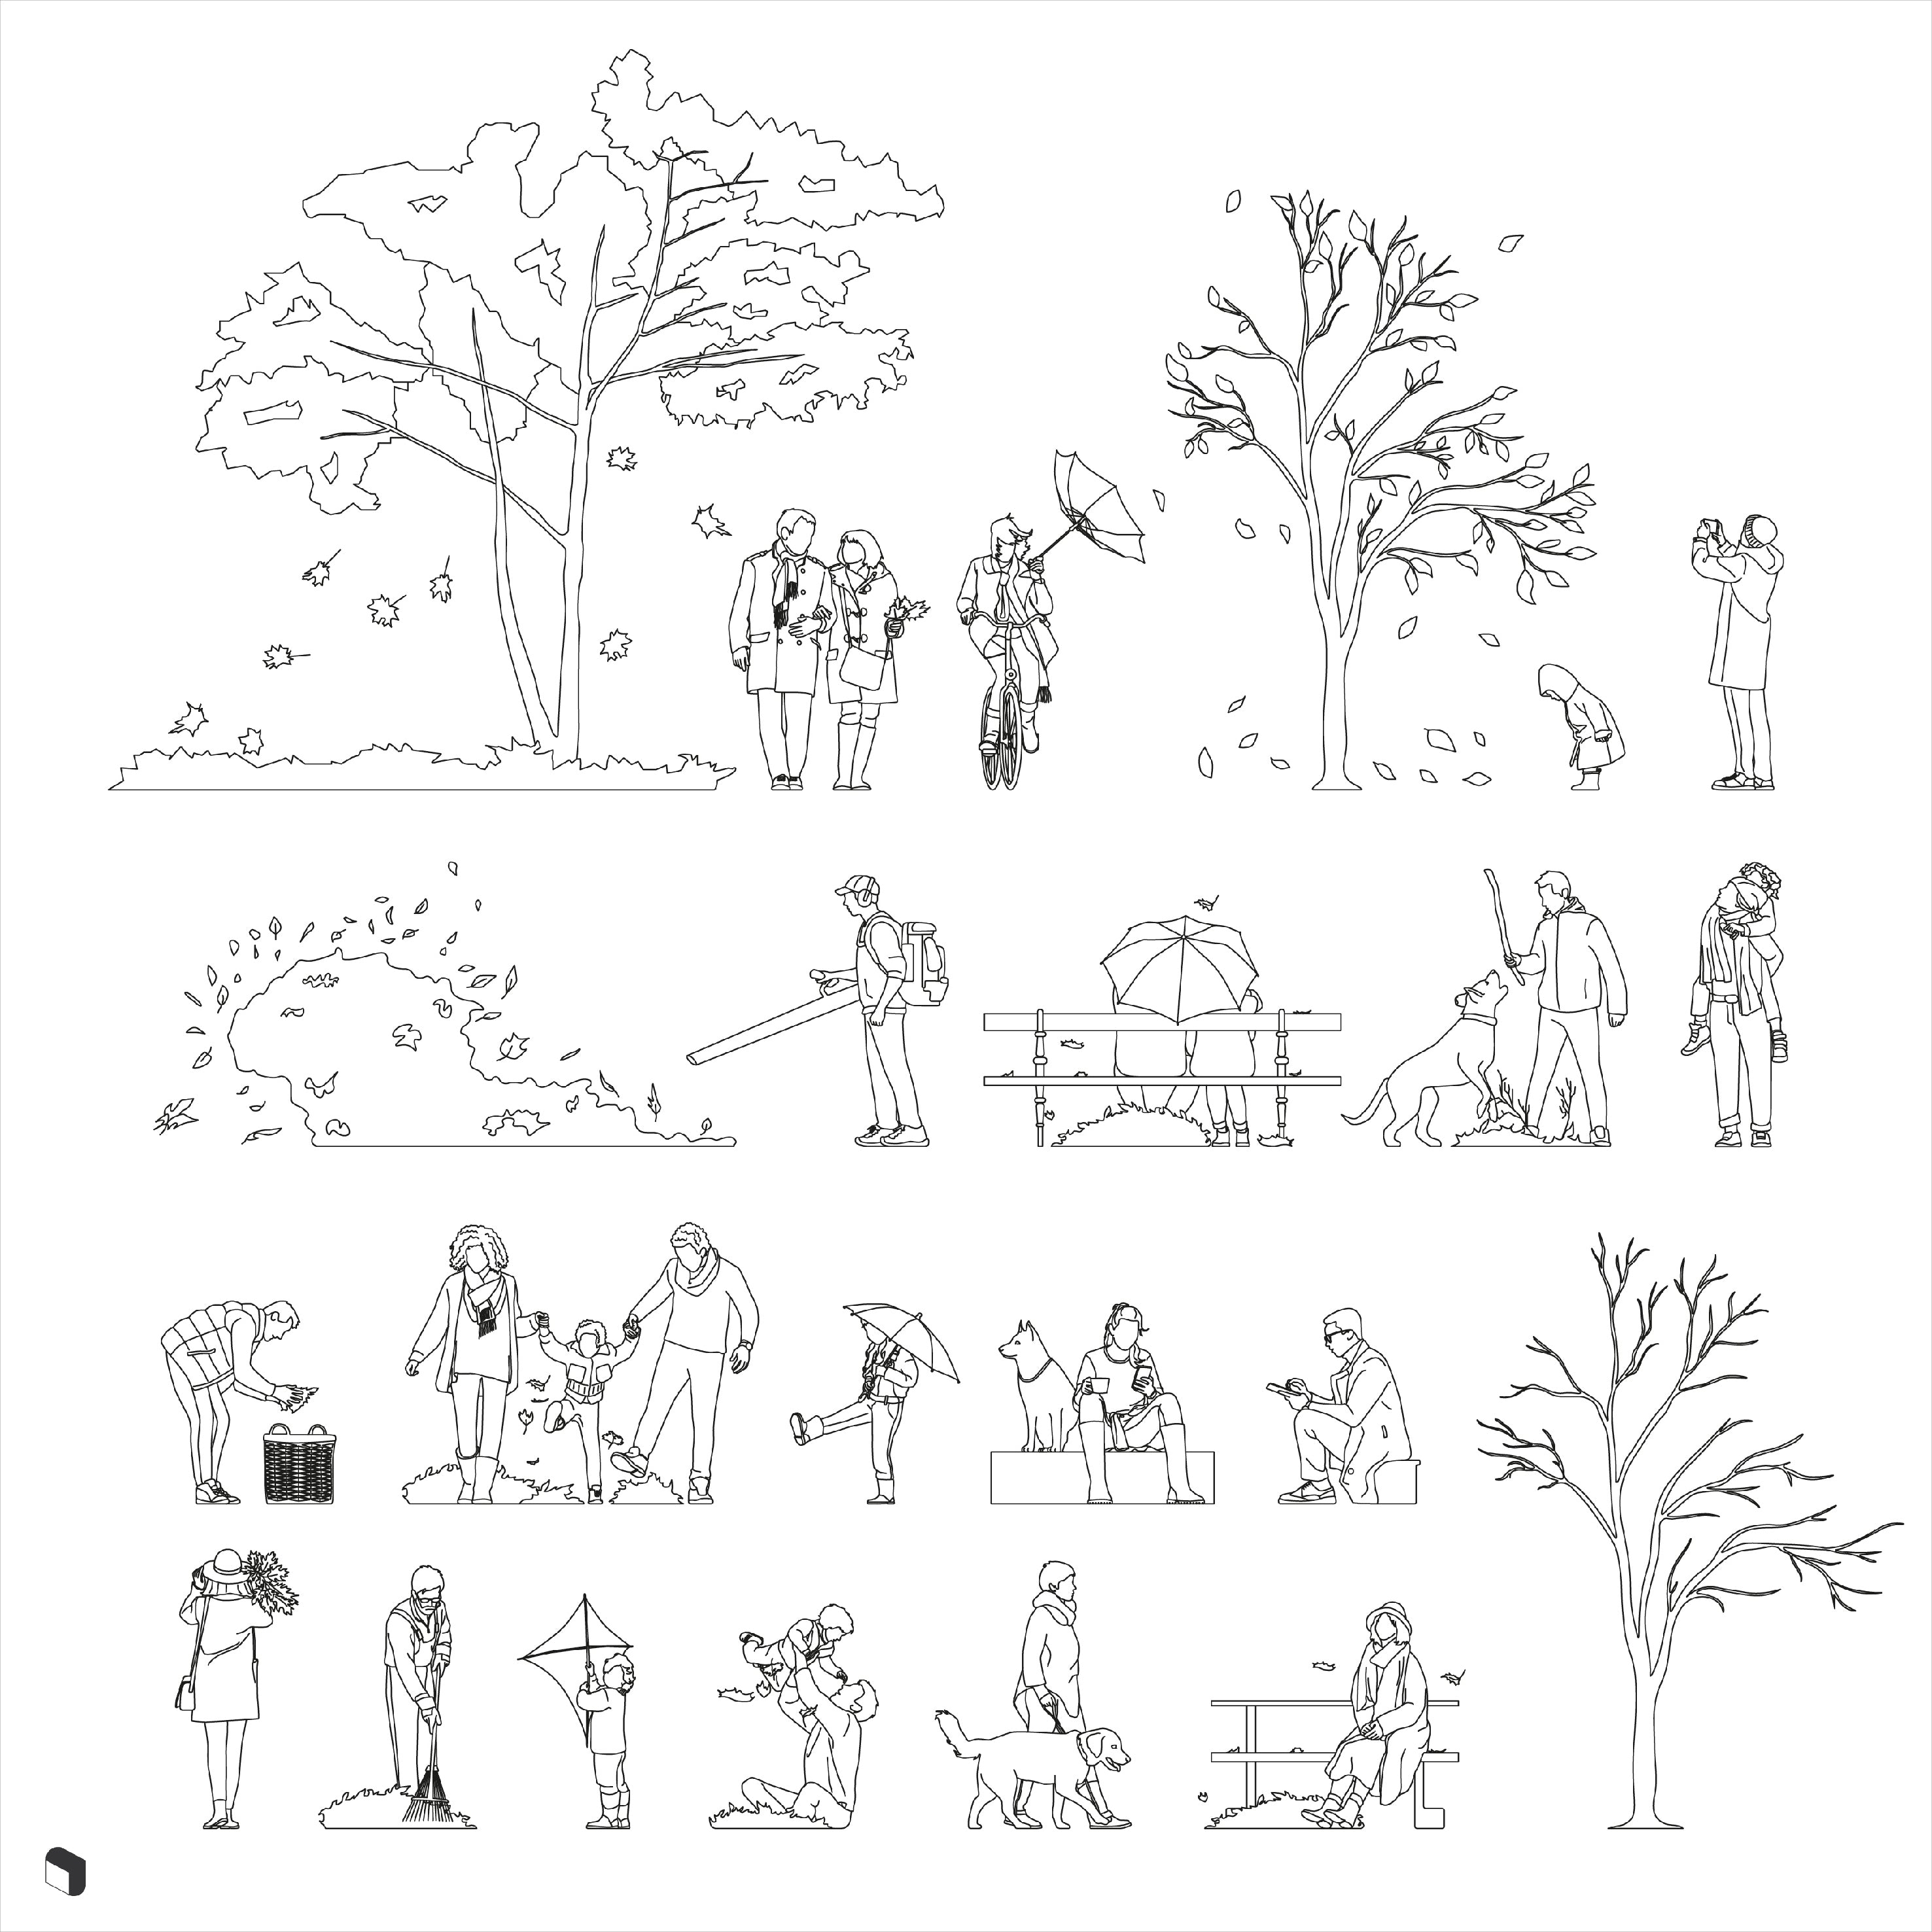 Cad Autumn People DWG | Toffu Co